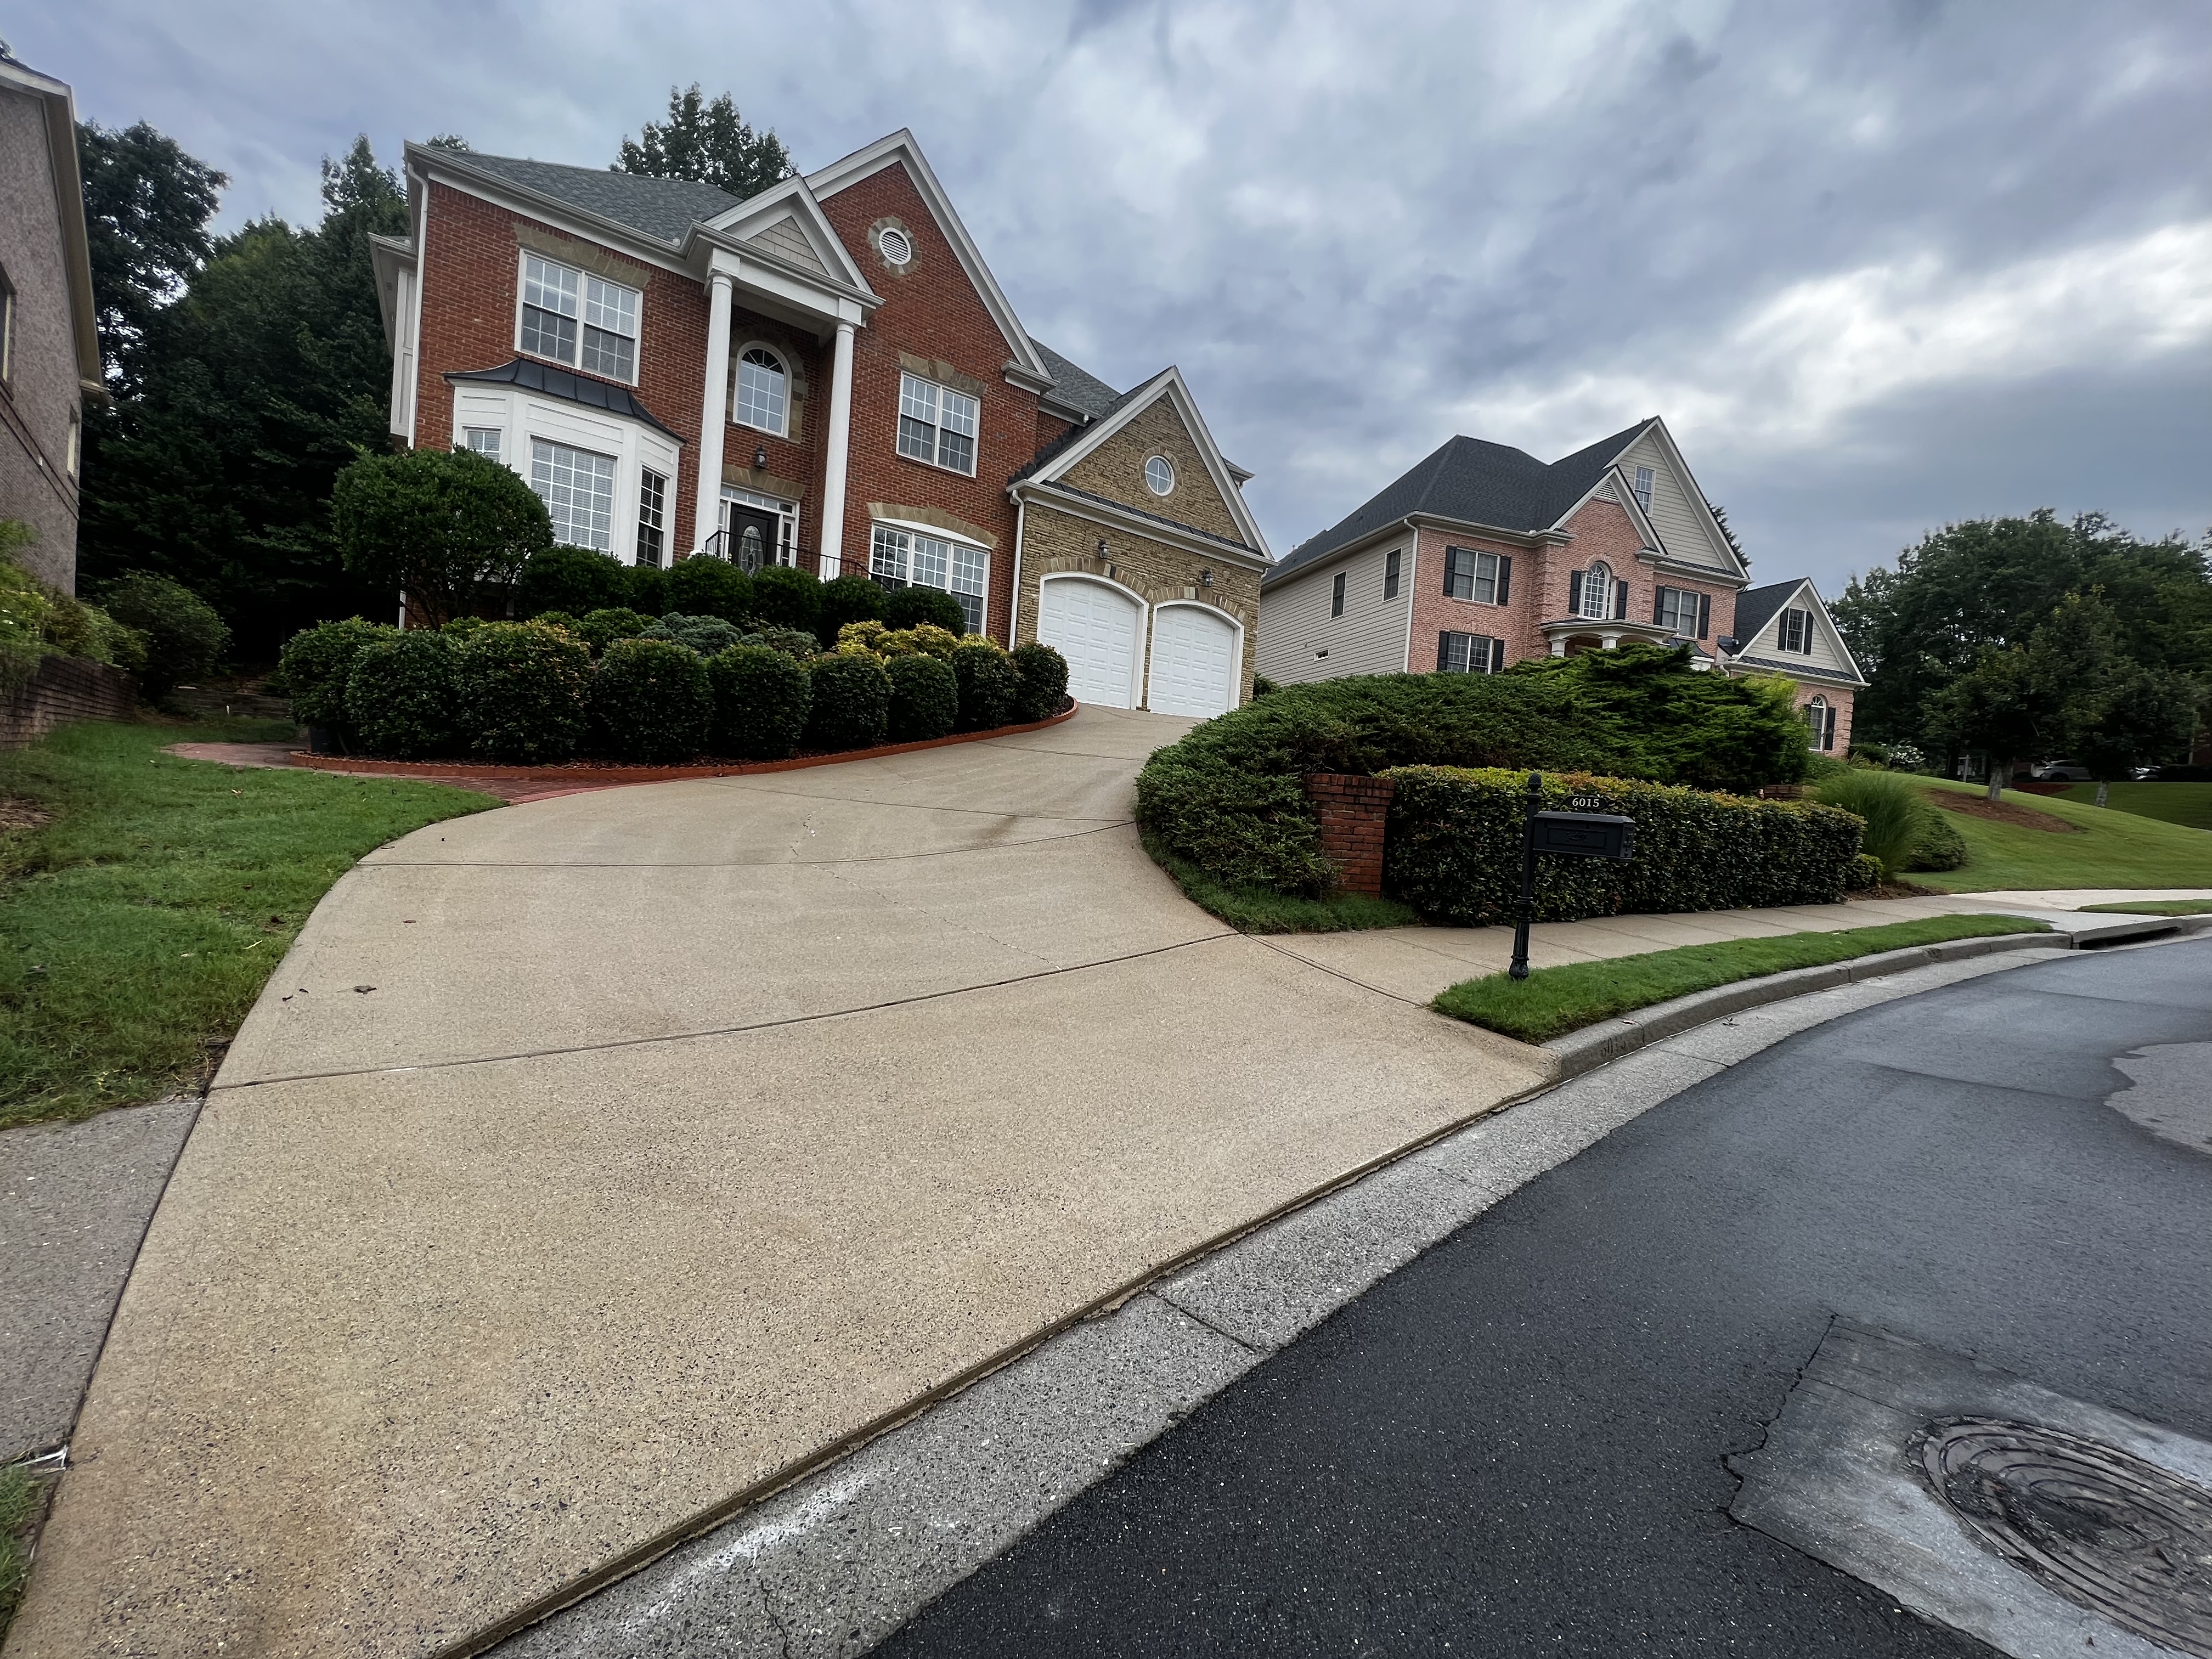 Driveway Cleaning in Suwanee